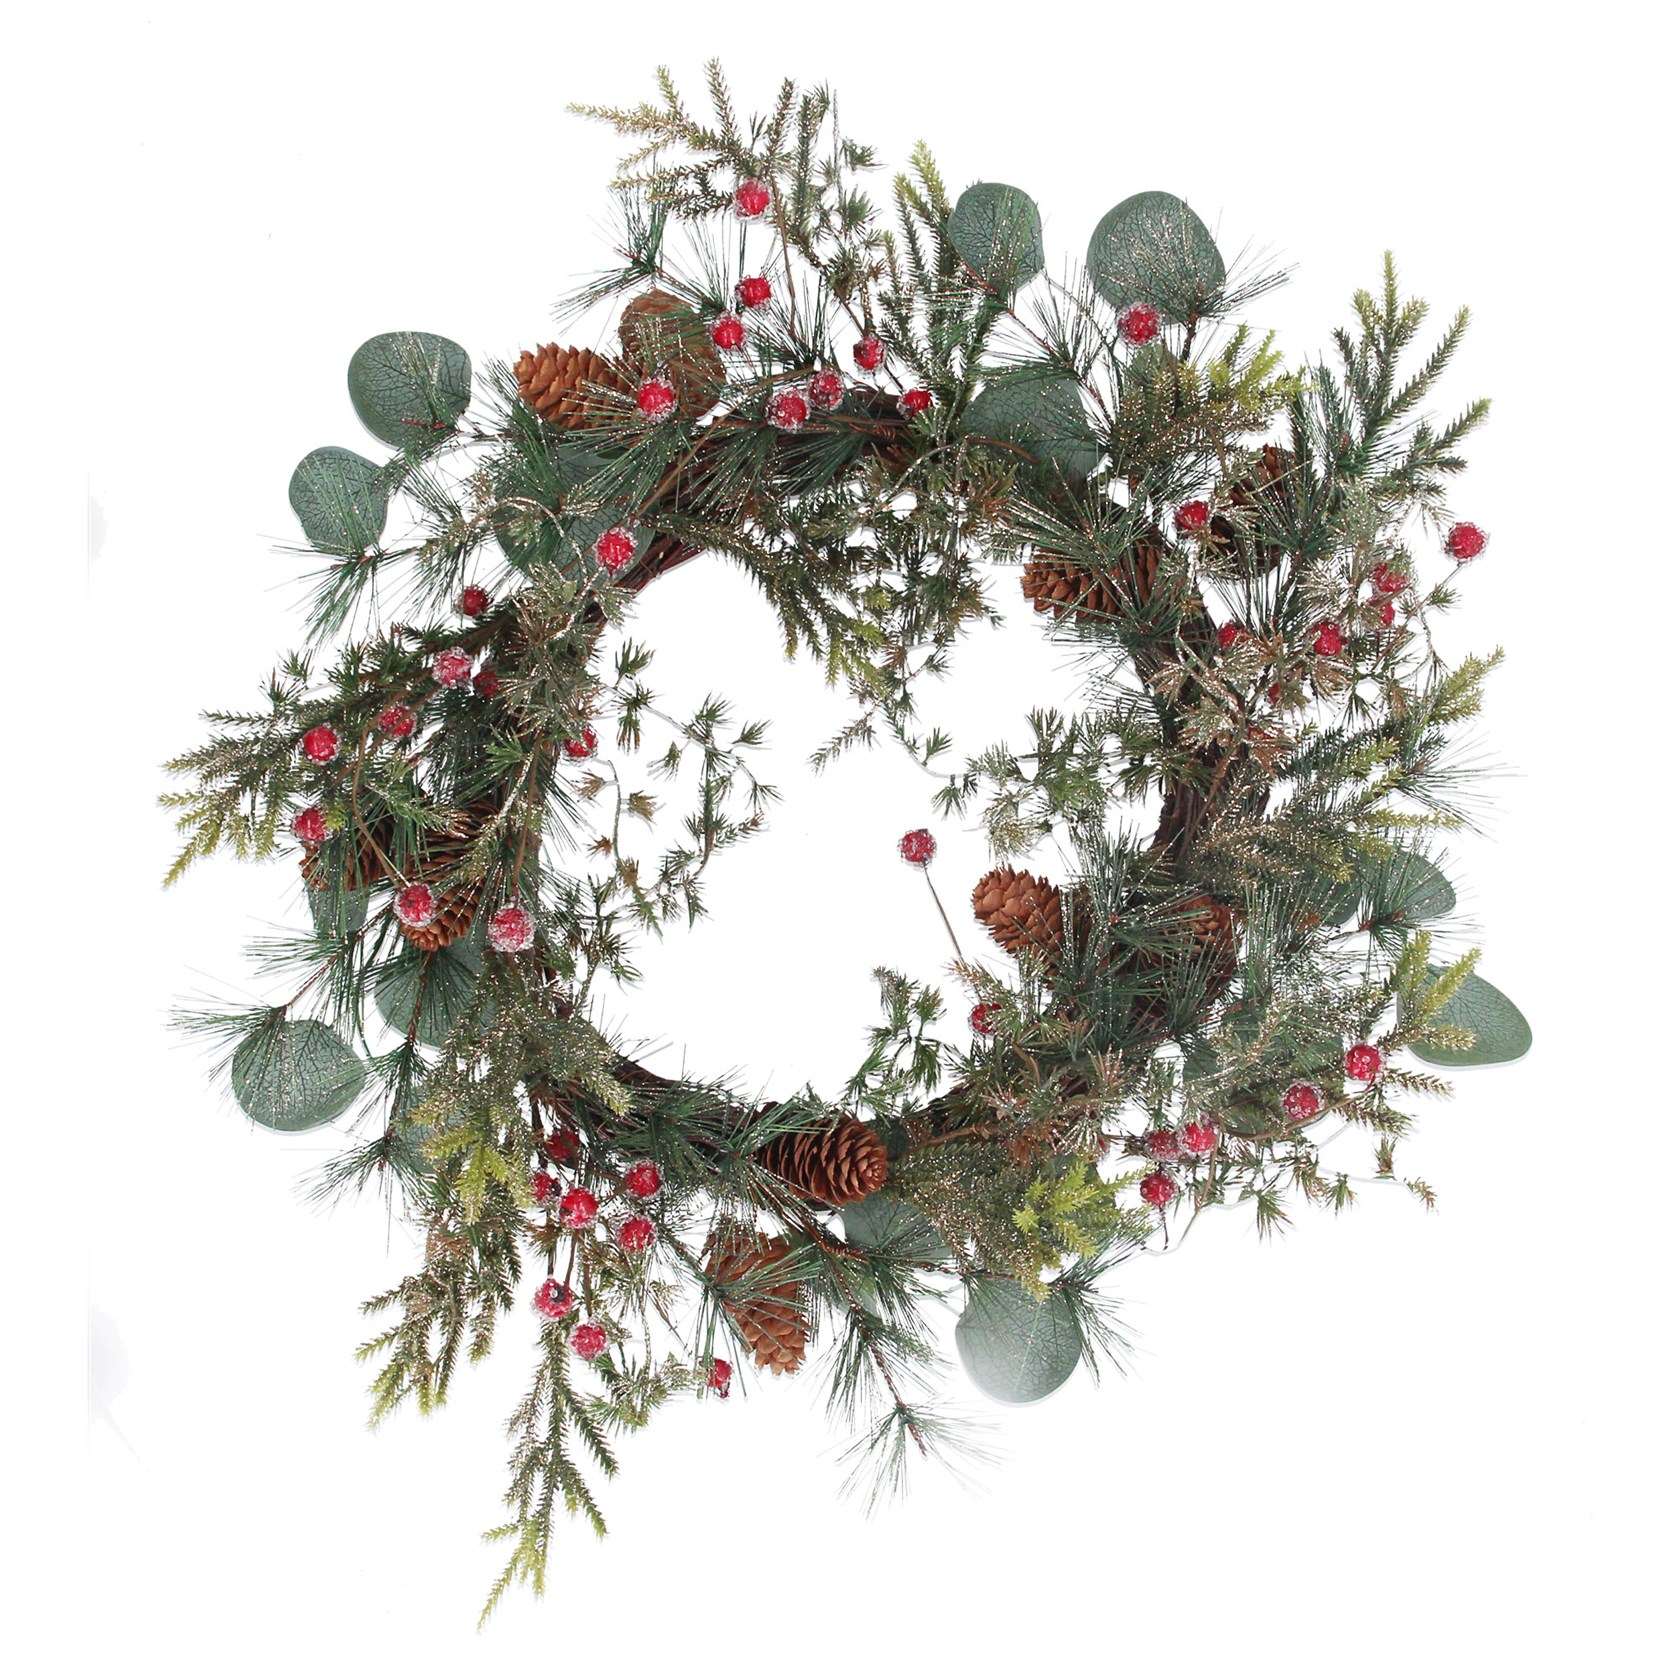 Eucalyptus fir and red berry Christmas wreath. By Gisela Graham. The perfect festive addition to your home.